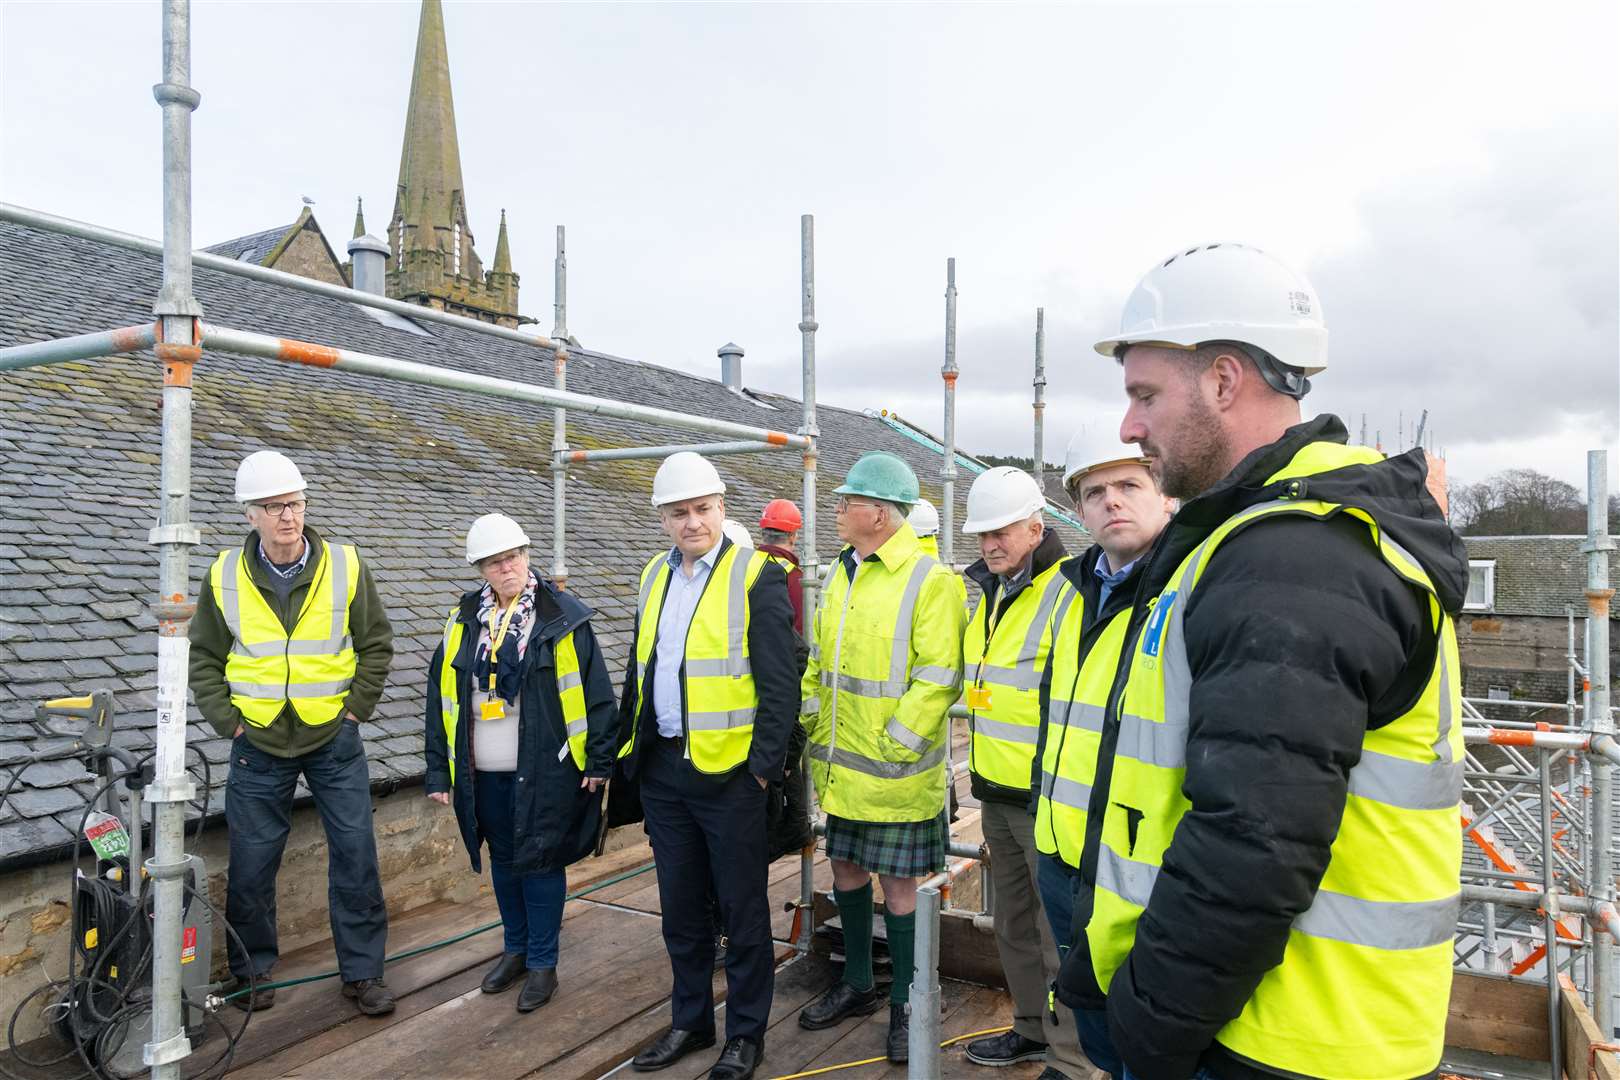 The group were guided around the insulation works at the top of the building.